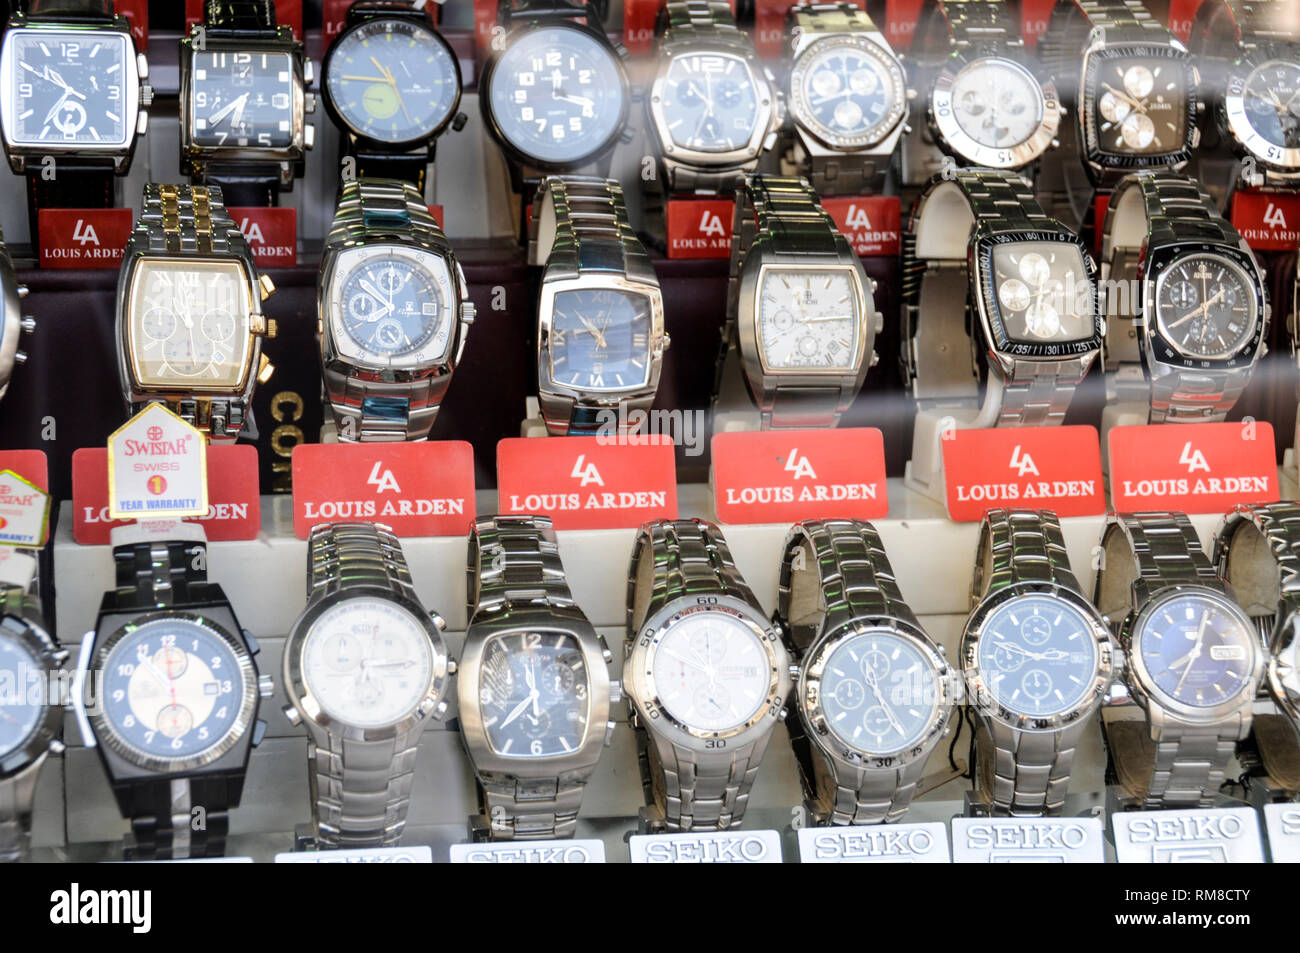 A display of cheap wrist watches on sale at a market in Dubai in the United  Arab Emirates (UAE Stock Photo - Alamy